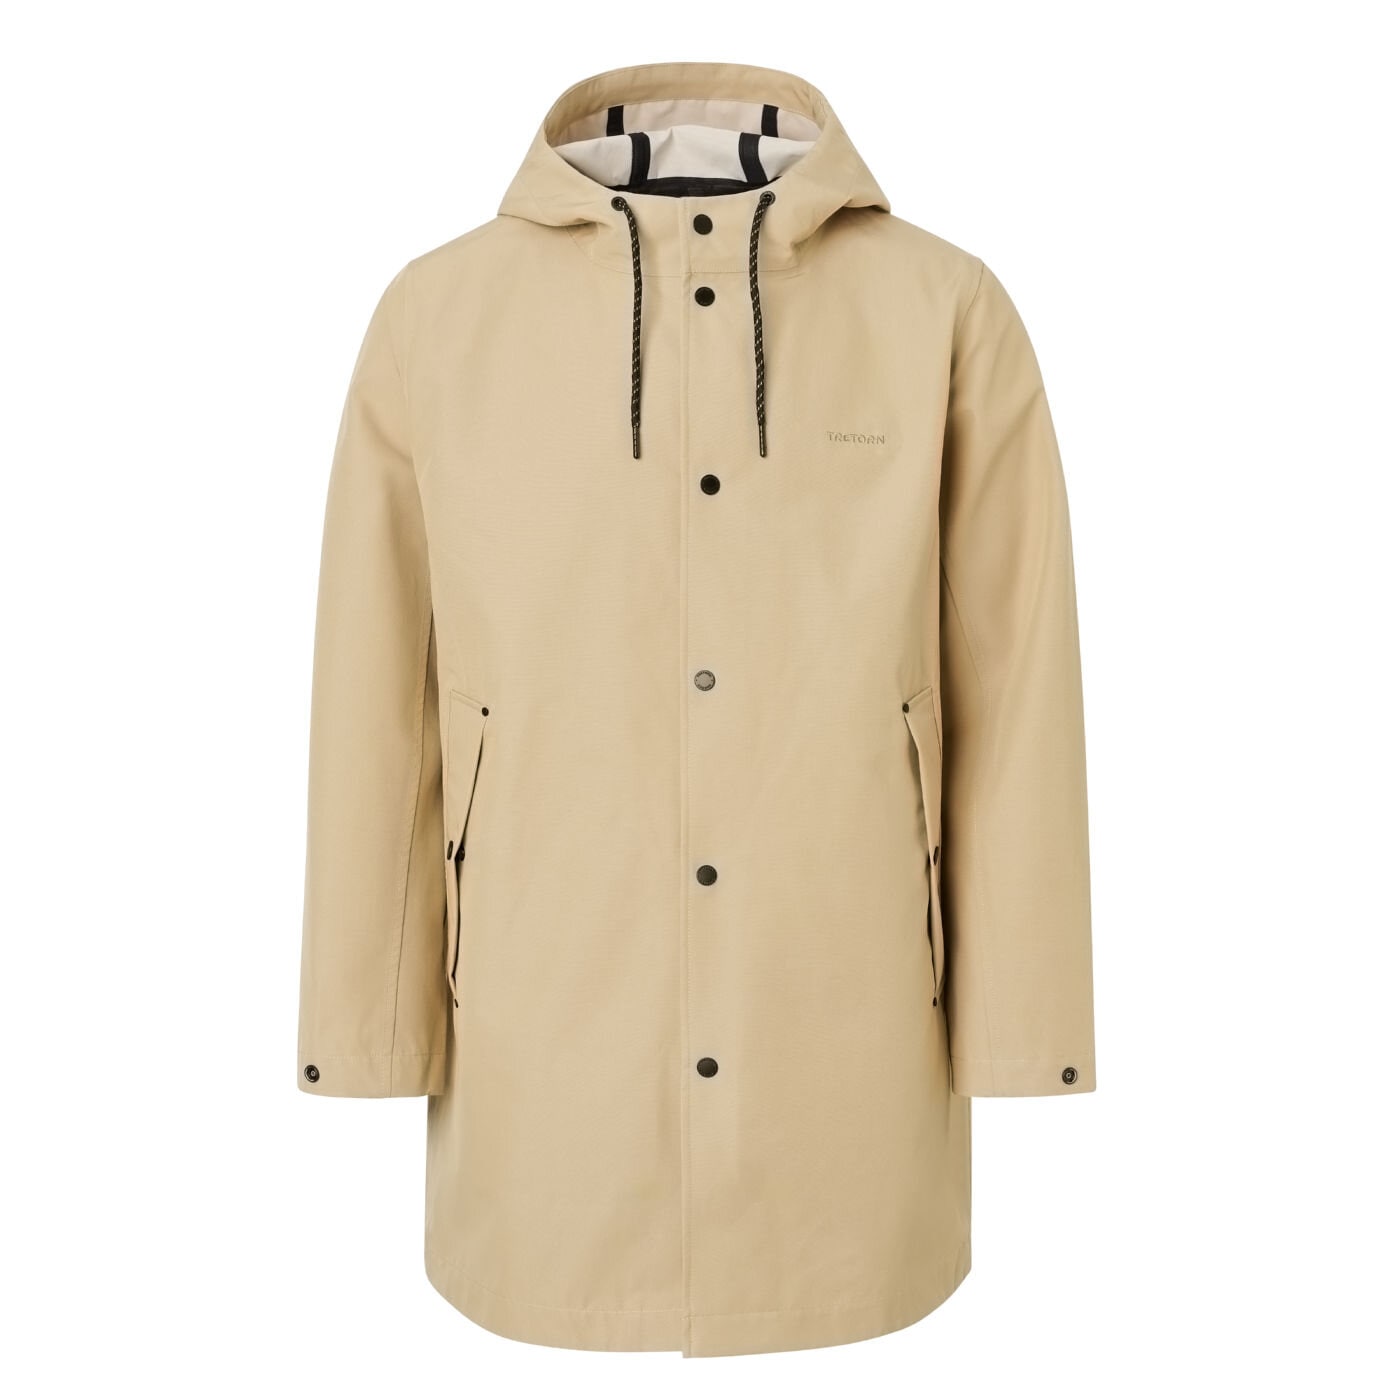 ICON rain coat by Tretorn in the colour beige for men and women